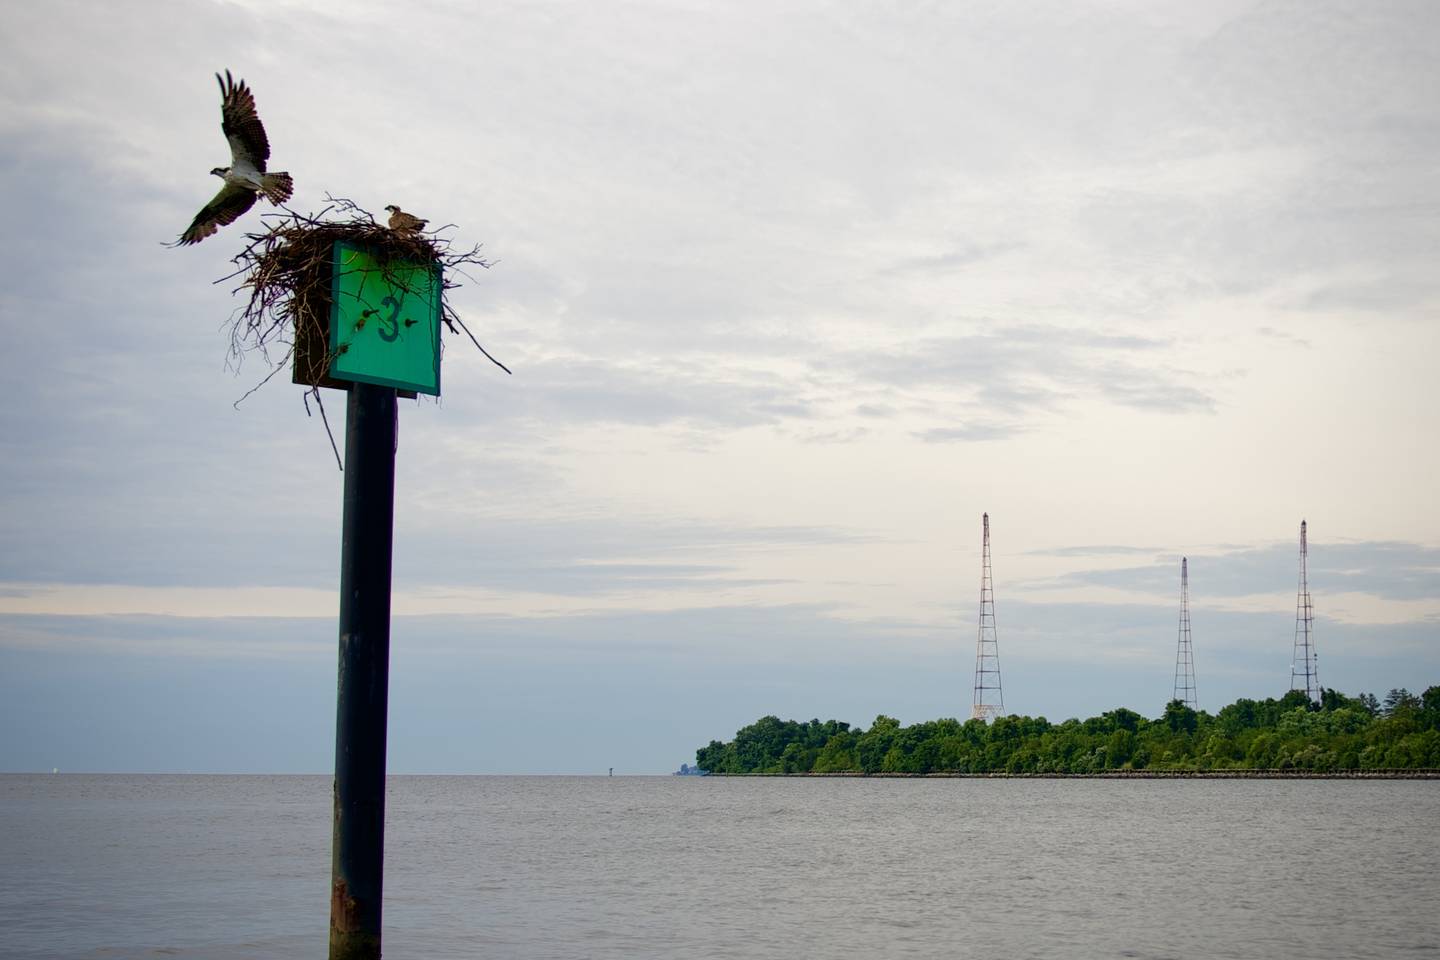 An osprey takes off from its nest perched on a navigation pole erected in the Severn River, with the remaining three of nineteen now-defunct communications towers standing aloft on Greenbury Point.